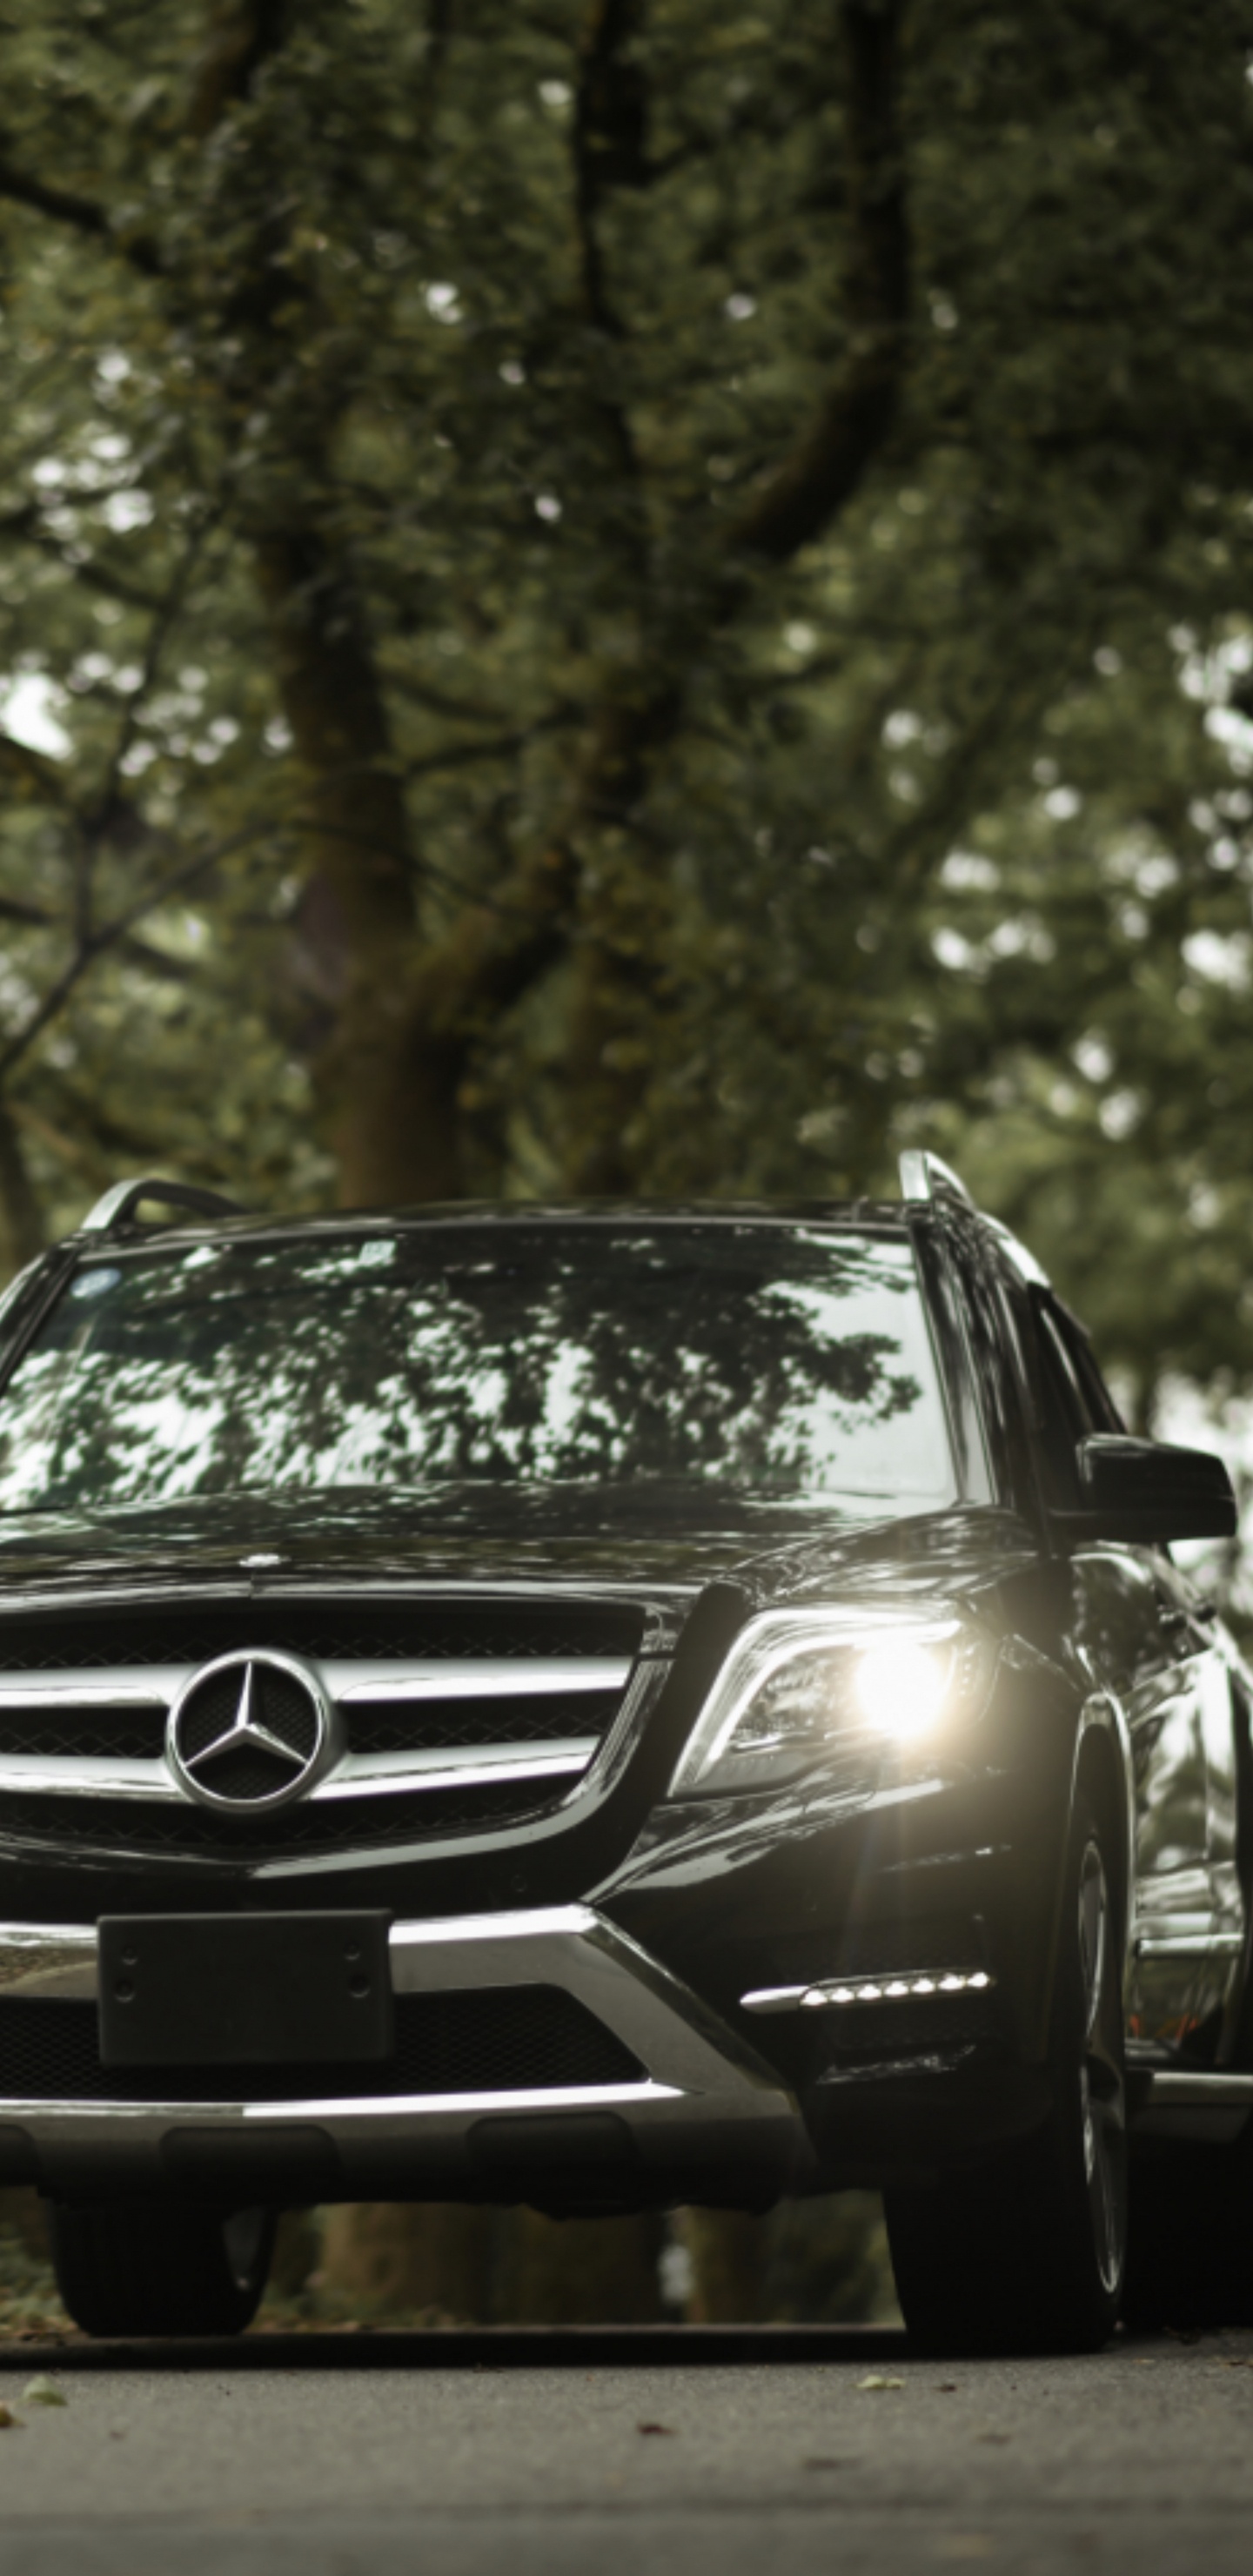 Black Mercedes Benz Car on Forest During Daytime. Wallpaper in 1440x2960 Resolution